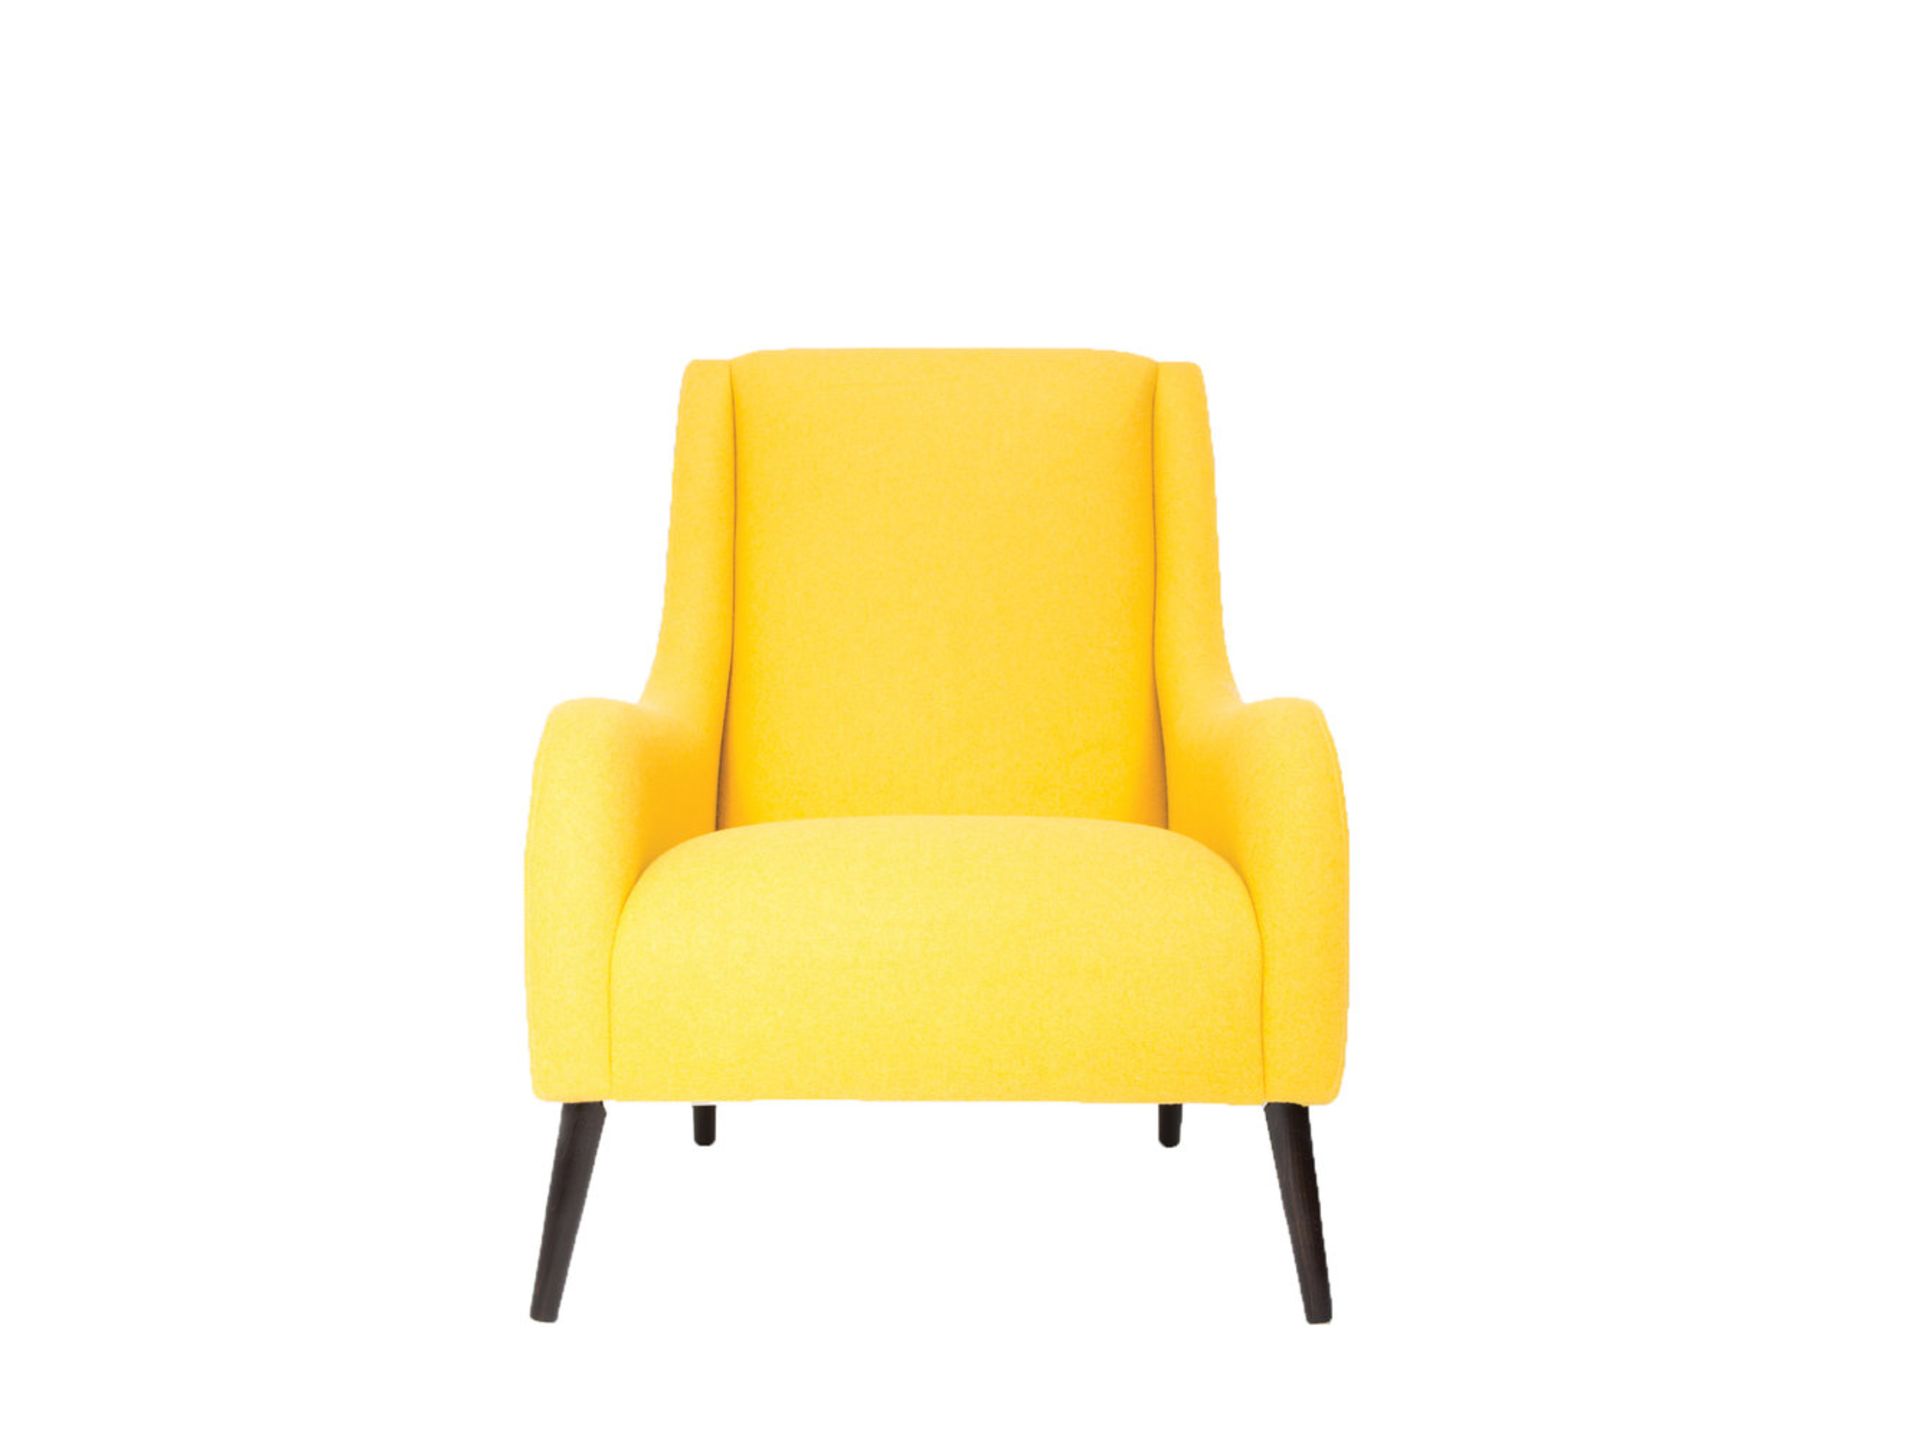 1 x Lauran Wolf & Sunshine Armchair - Two Tone Wool Fabric in Yellow and Grey - RRP £779! - Image 7 of 7